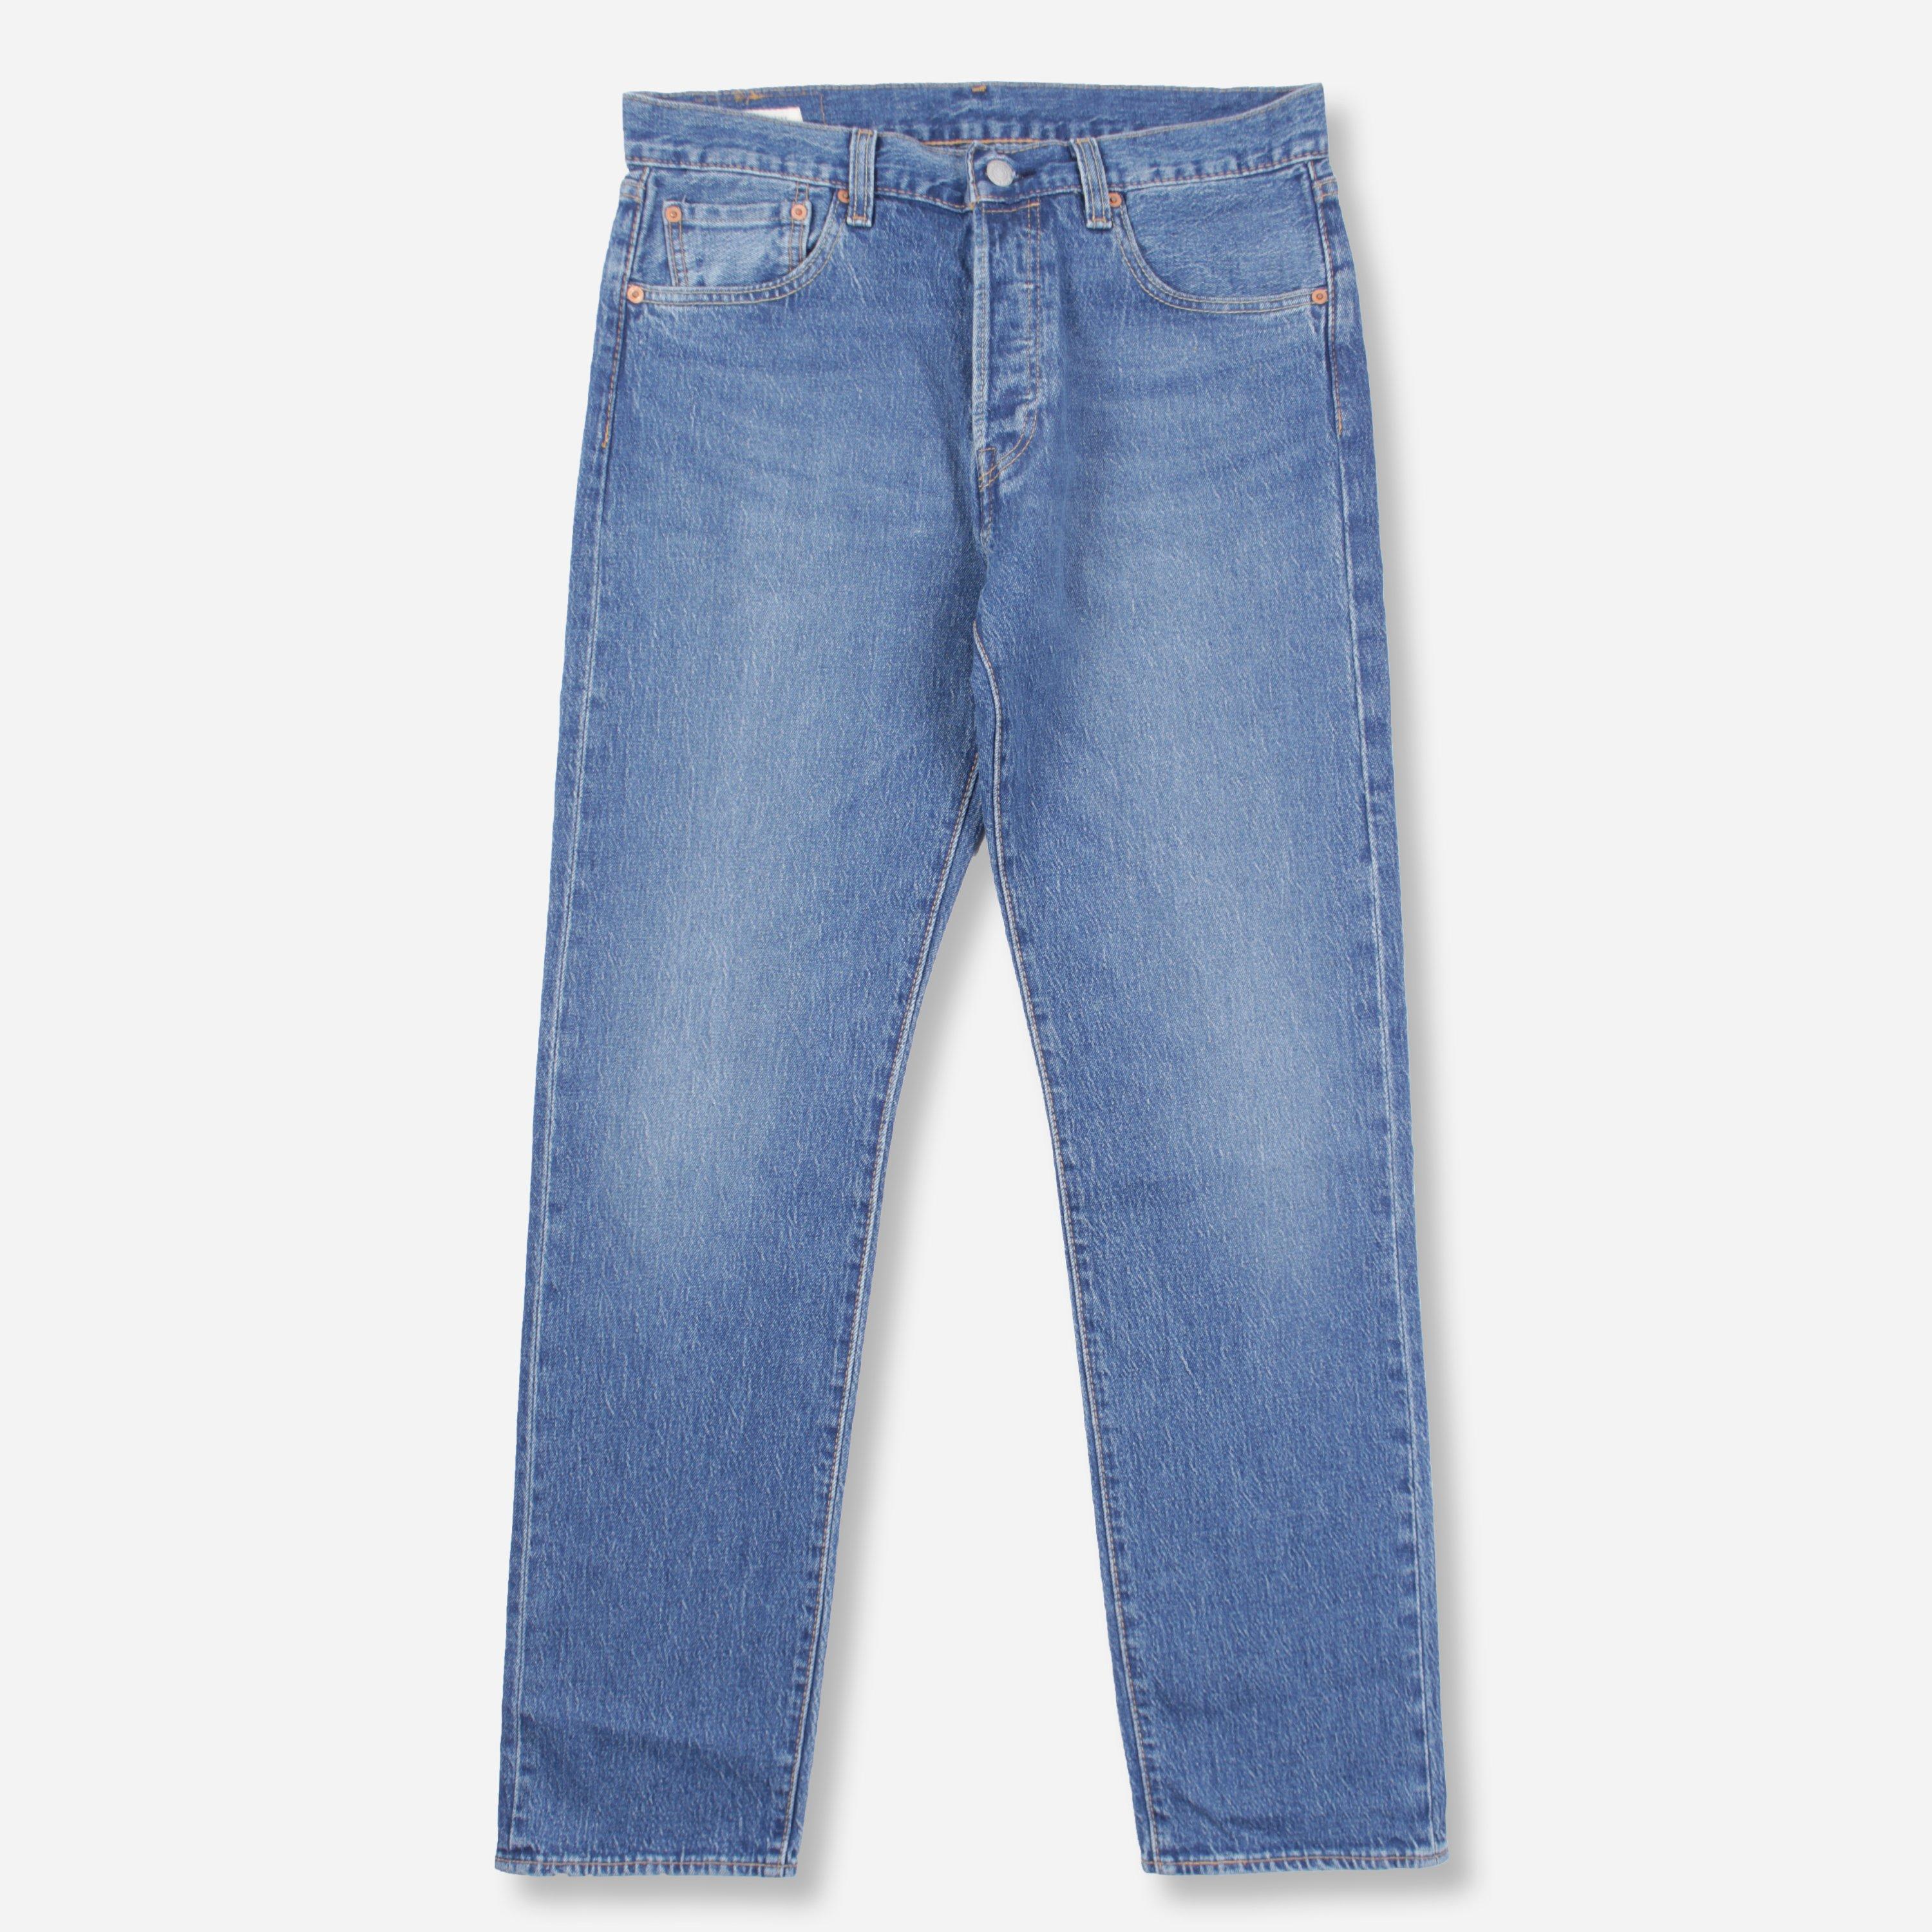 levi's red tab 501